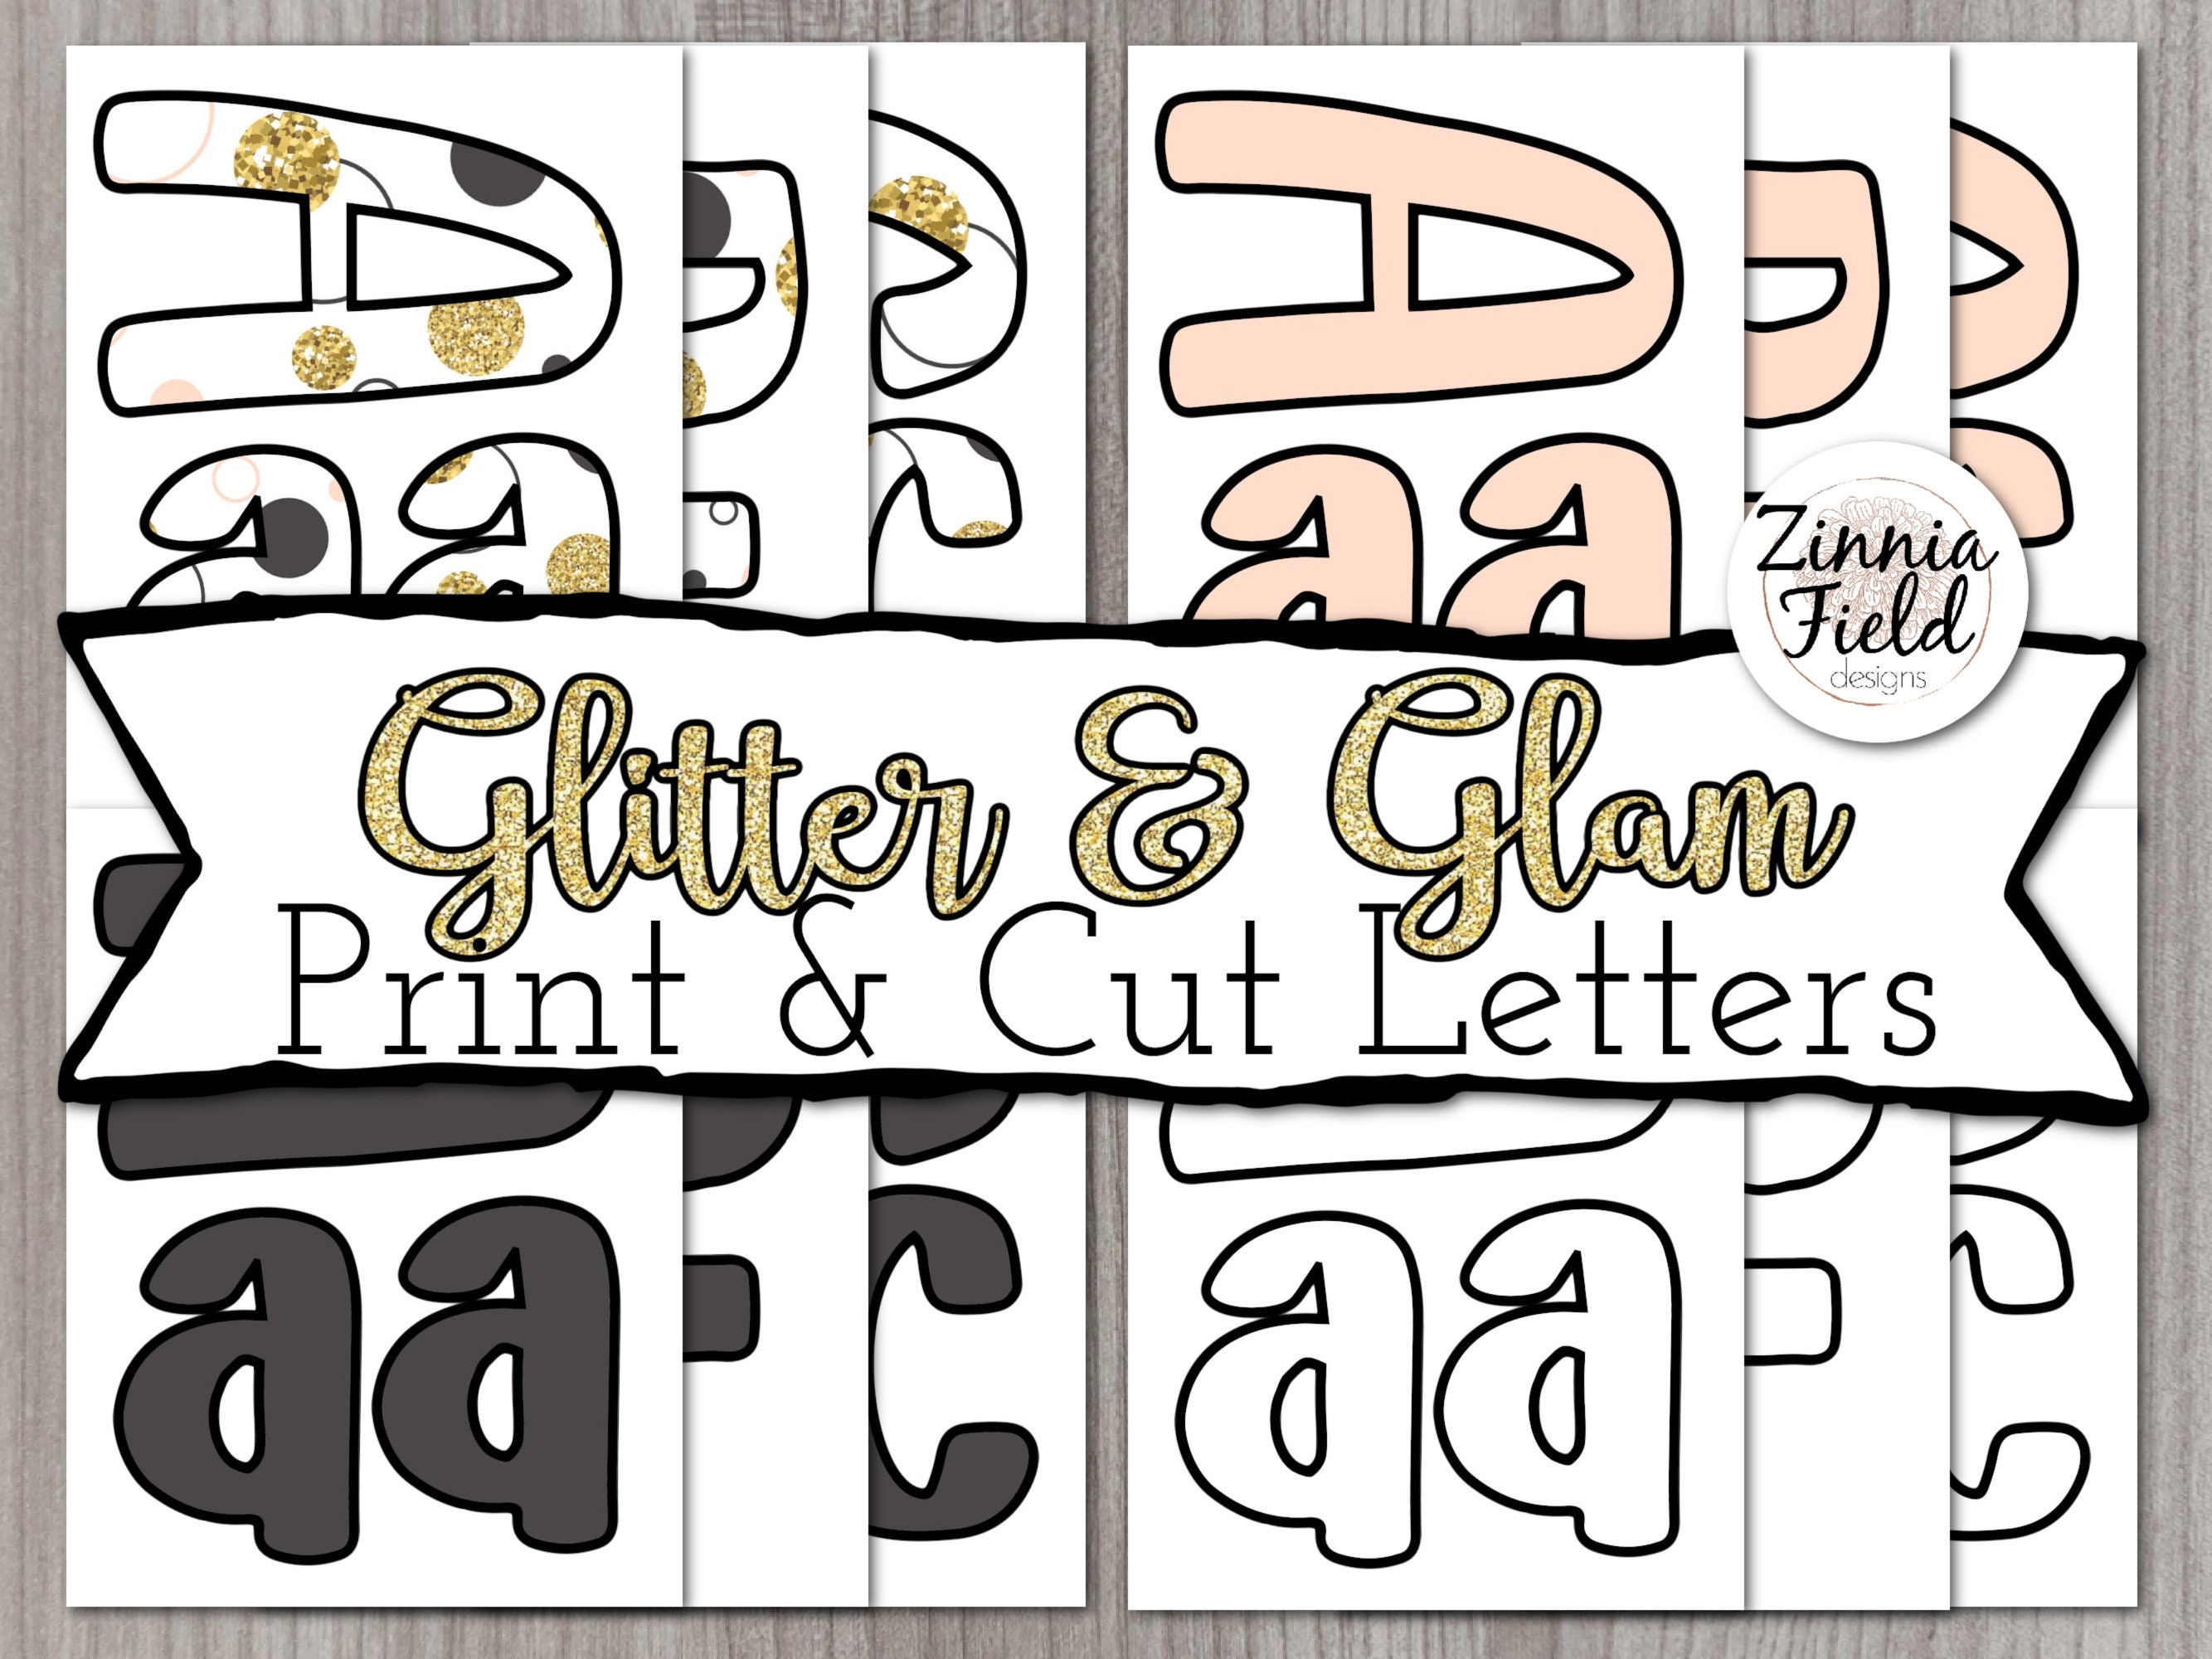 4 Inches Golden Letter Sticker, Golden Bulletin Board Letters, Self-adhesive  Letter, Numbers And Symbols, Alphabet Letters For Craft, Paper Cut Out Poster  Letters And Number For Bulletin Boards - Toys & Games 